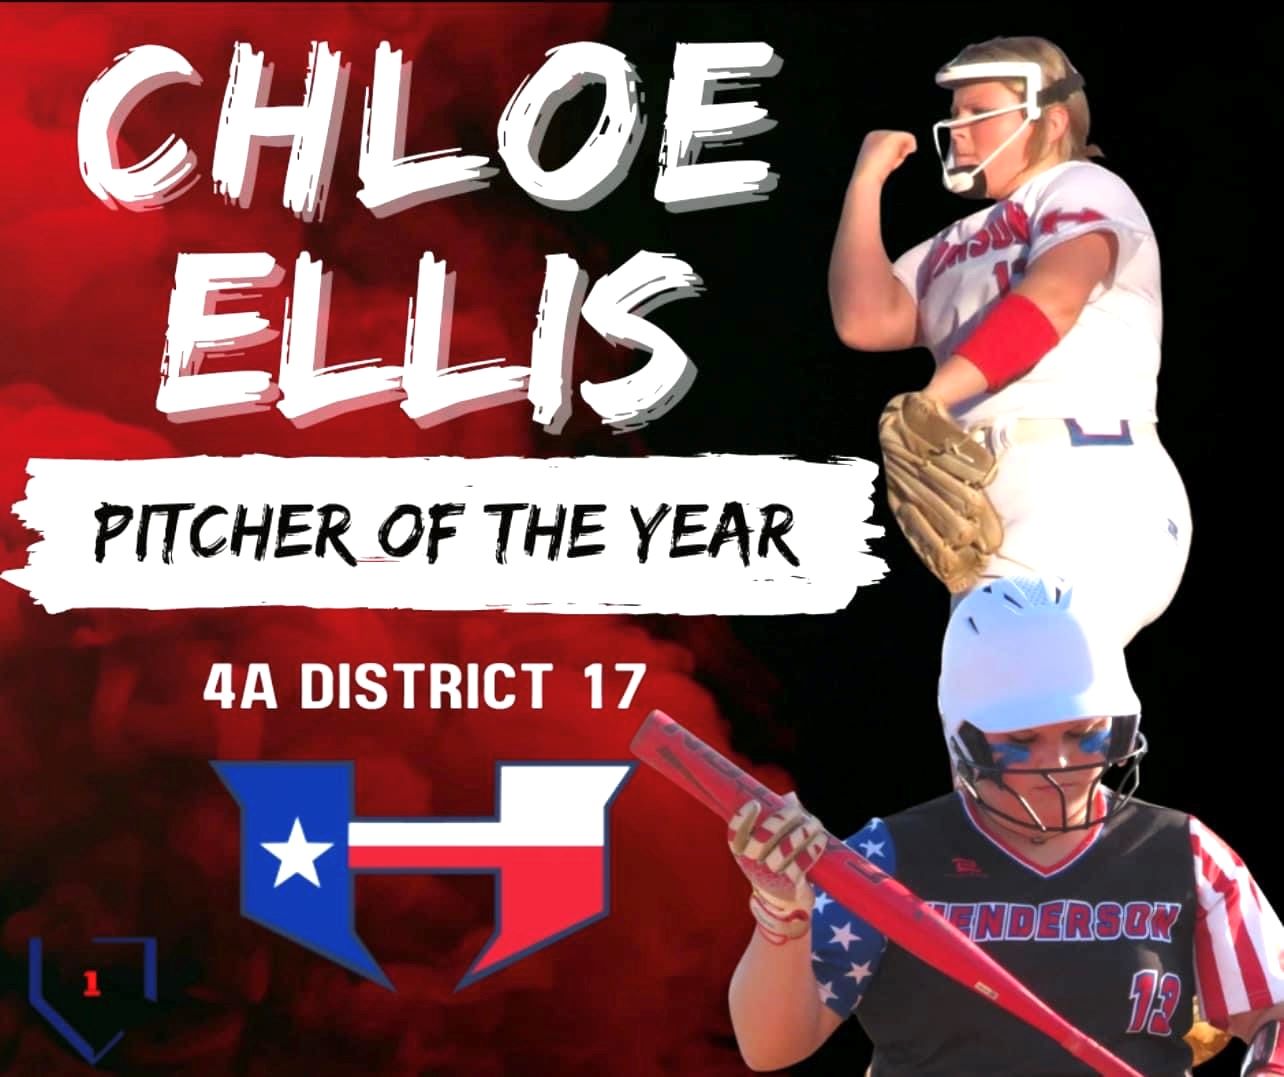 Henderson's Chloe Ellis, shown here in dynamic artwork by the softball program's Facebook page, was named pitcher of the year as a part of the District 17-4A All-District softball team. (Photo courtesy of HENDERSON LIONS SOFTBALL FACEBOOK)